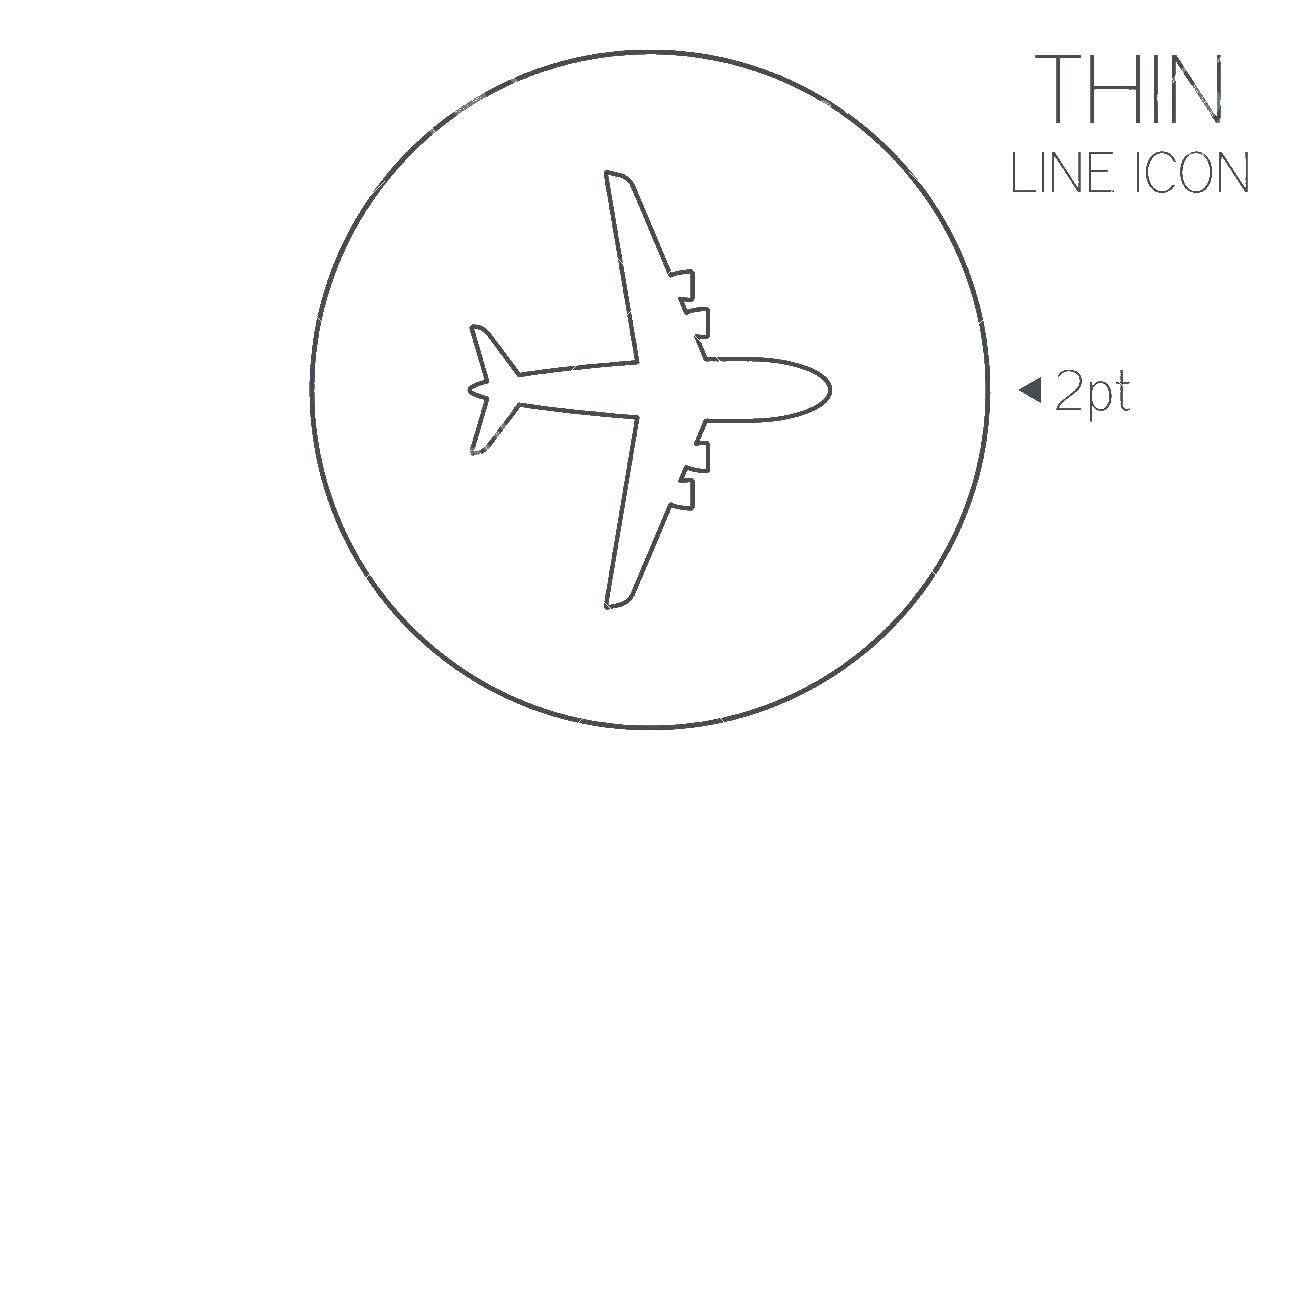 Coloring The plane in the circle. Category The contour of the aircraft. Tags:  plane.